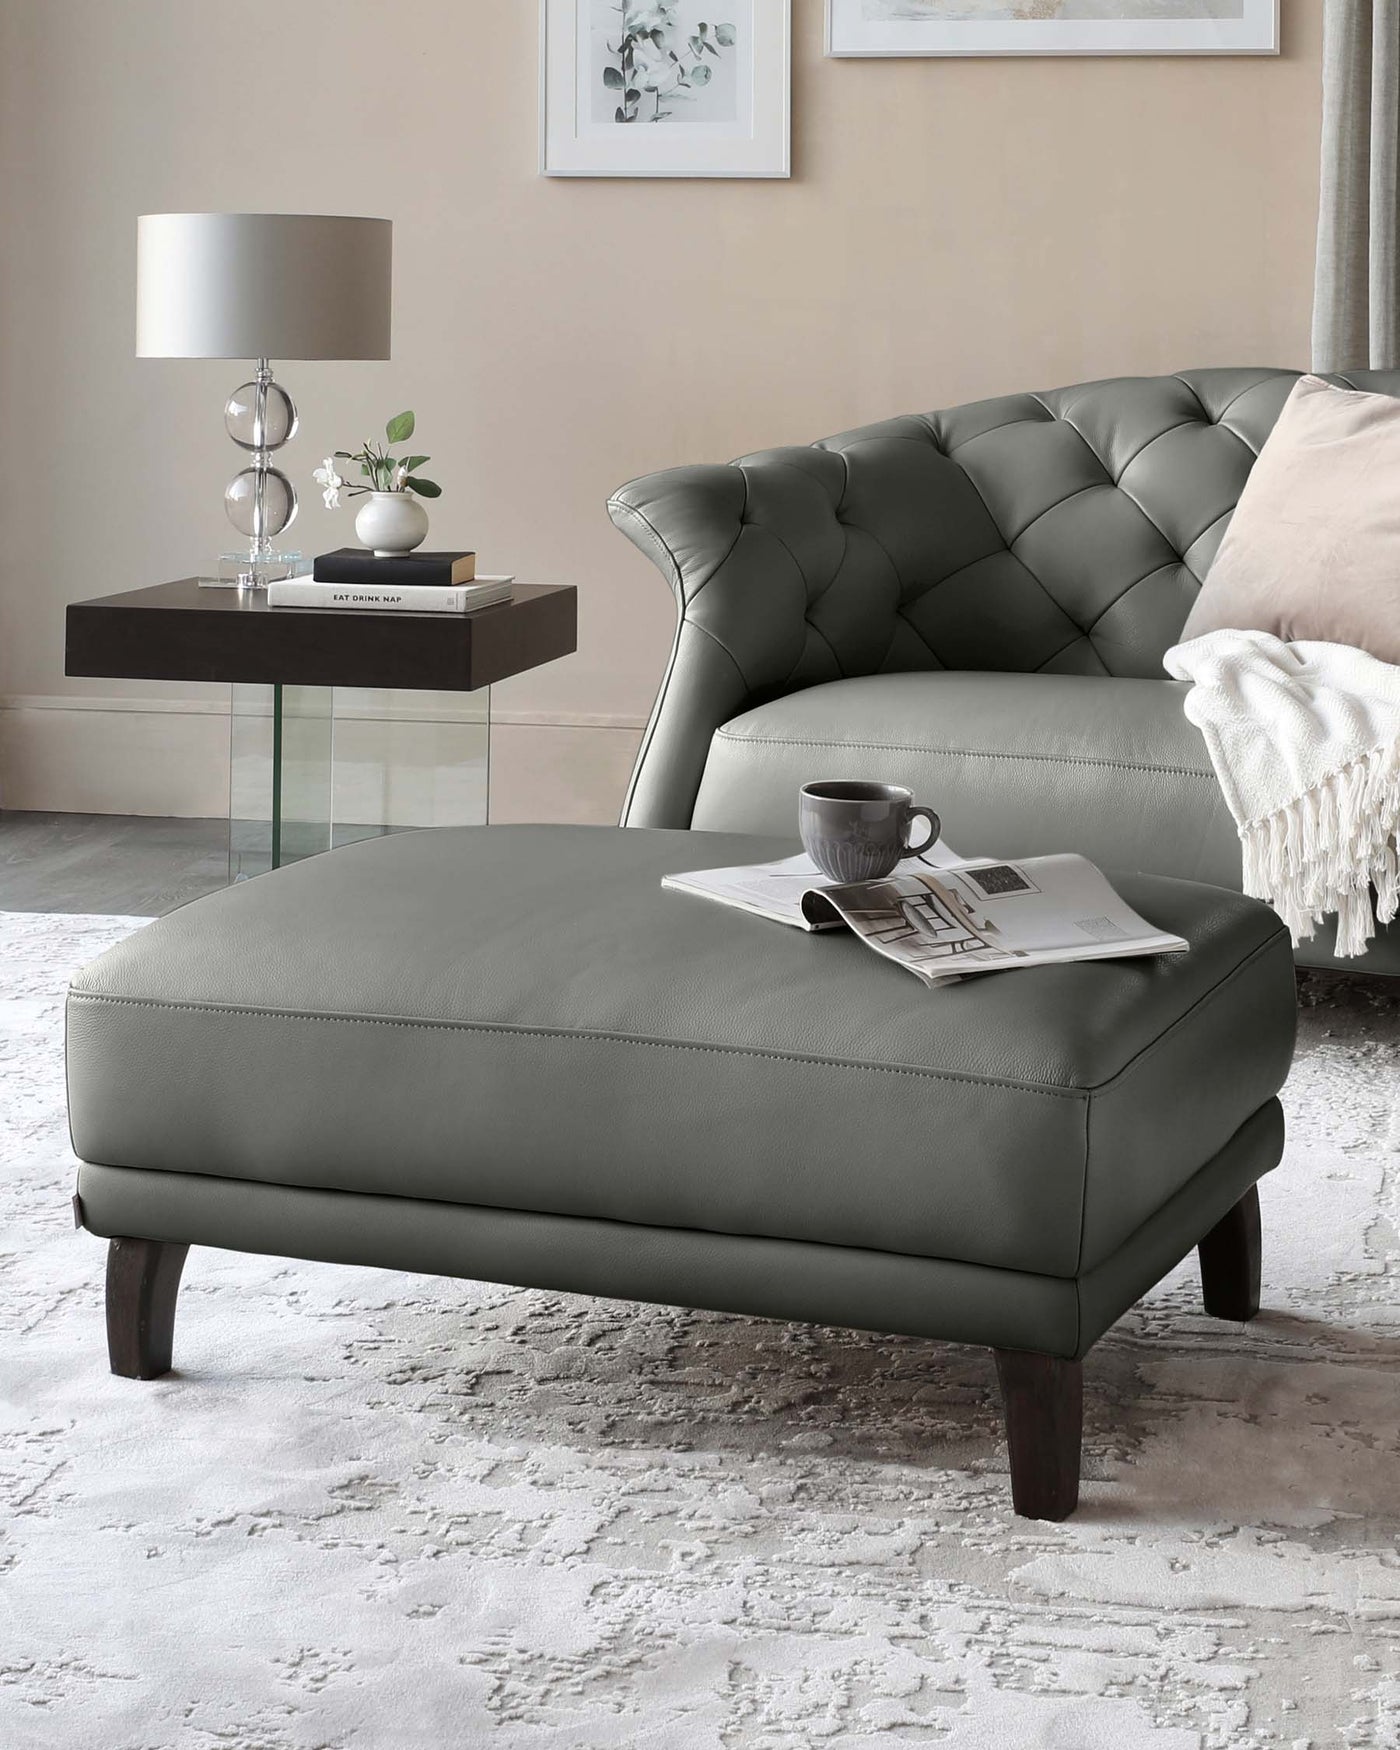 A luxurious grey leather tufted Chesterfield loveseat with a matching oversized ottoman, complemented by a modern glass and dark wood side table displaying decorative items and a contemporary style lamp.